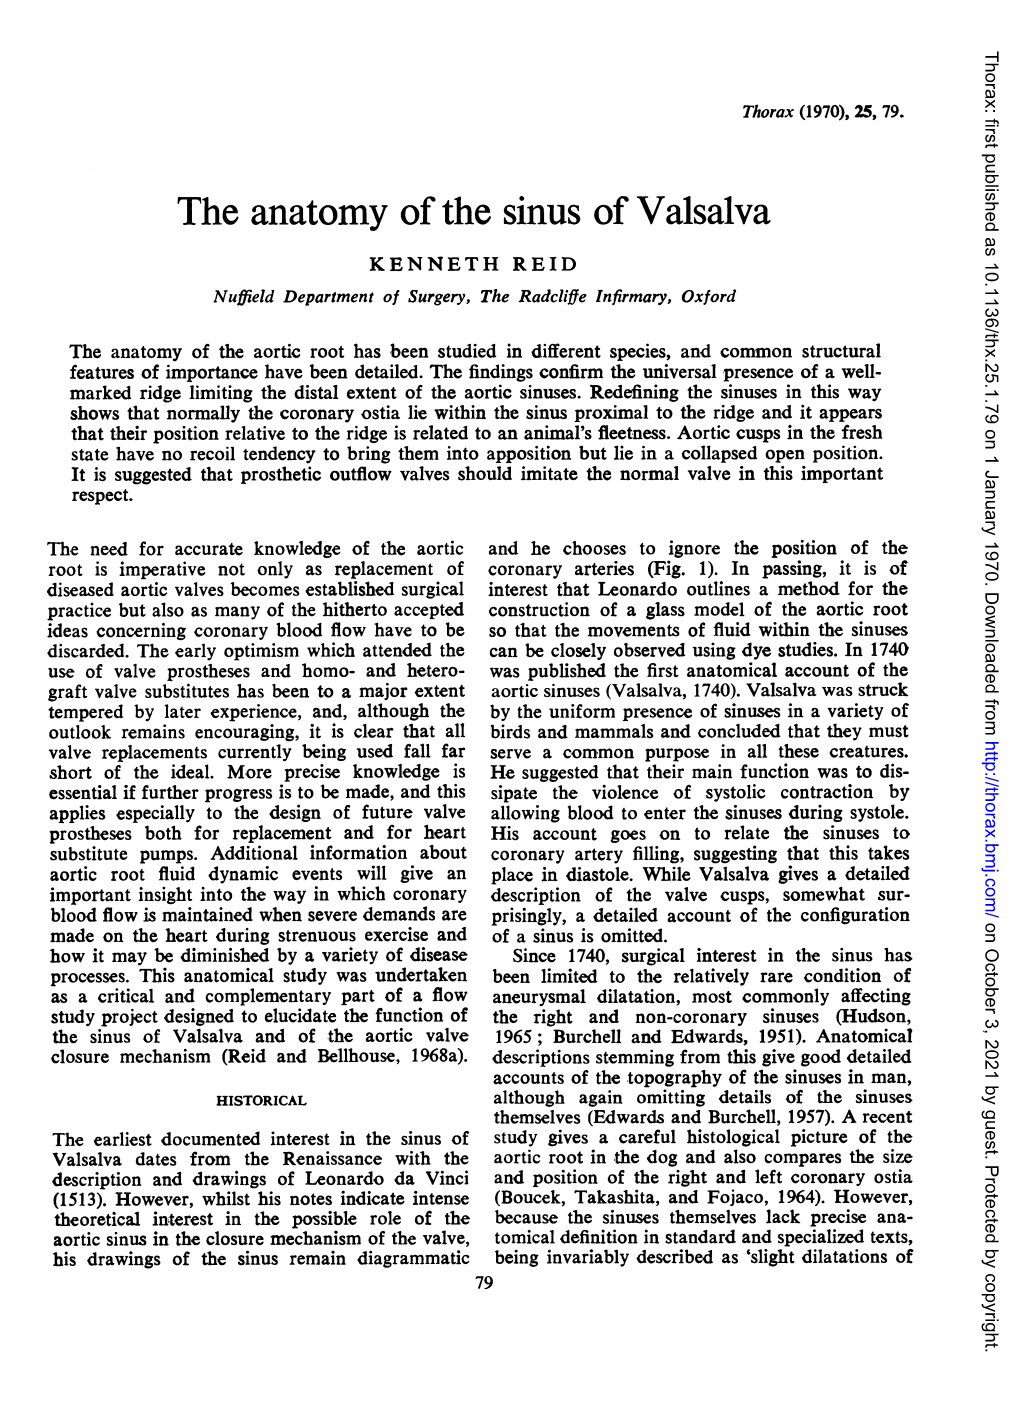 The Anatomy of the Sinus of Valsalva KENNETH REID Nuffield Department of Surgery, the Radcliffe Infirmary, Oxford